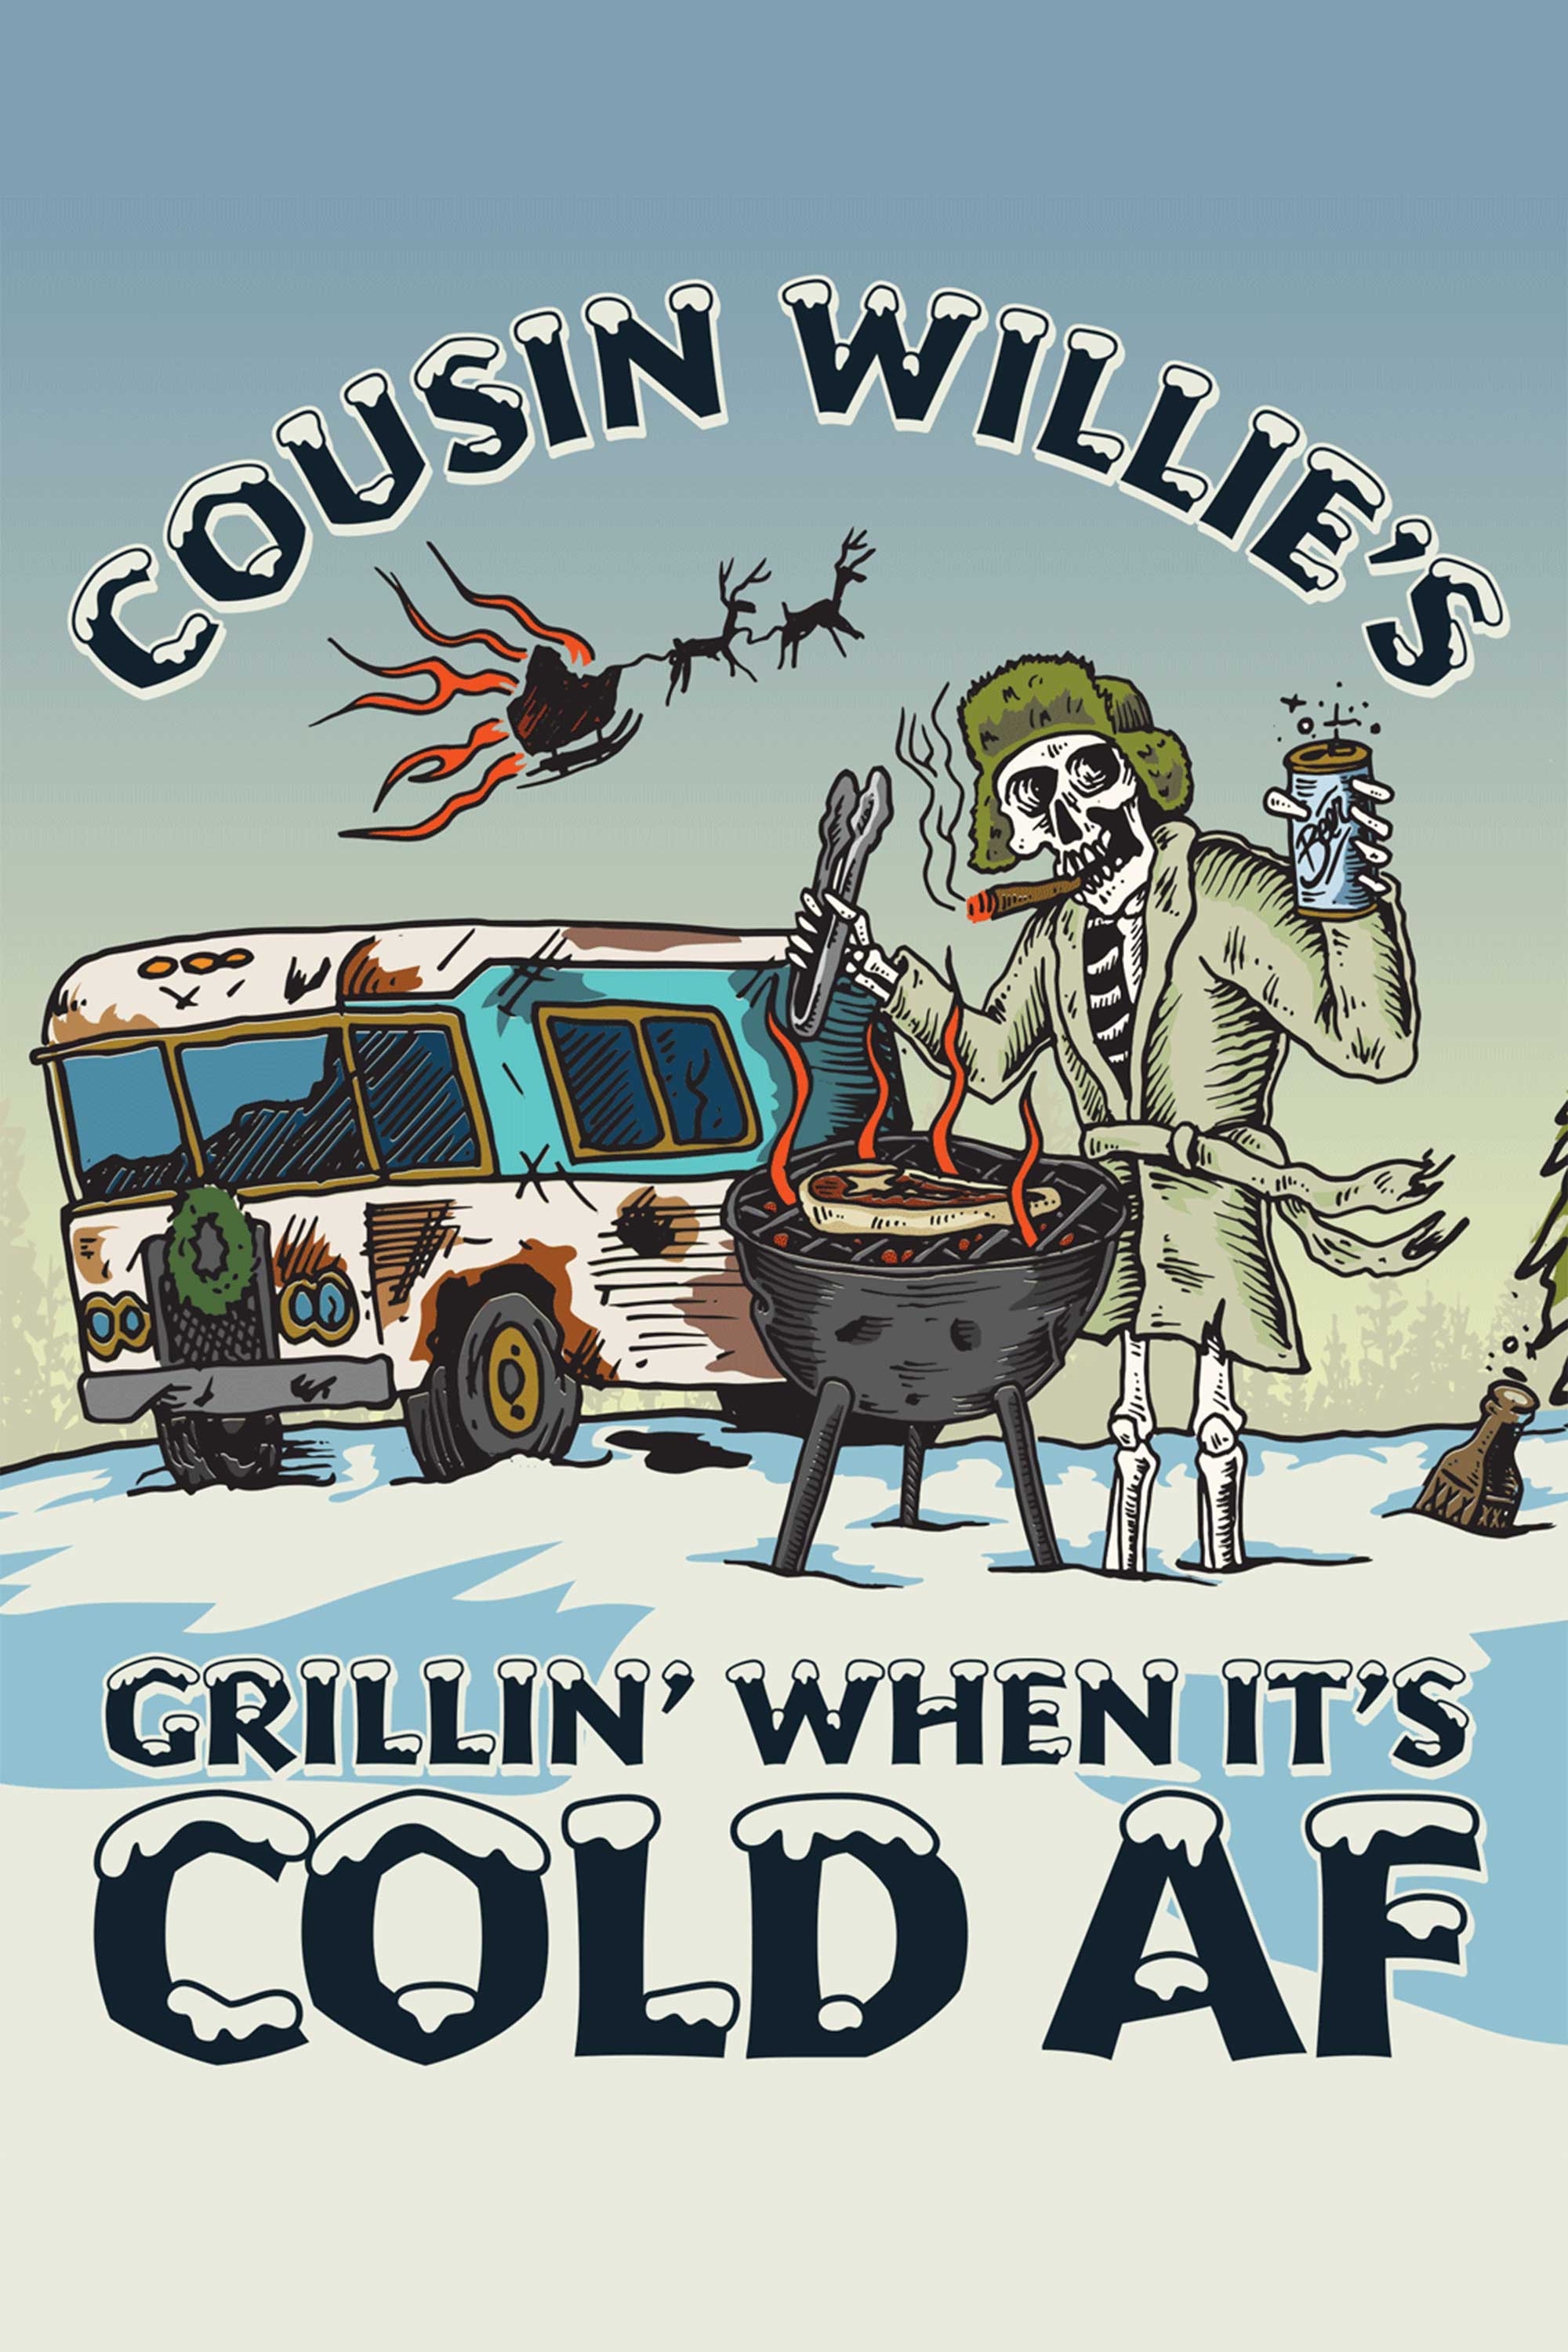 Cousin Willie’s Tips for Grillin' when it’s Cold AF